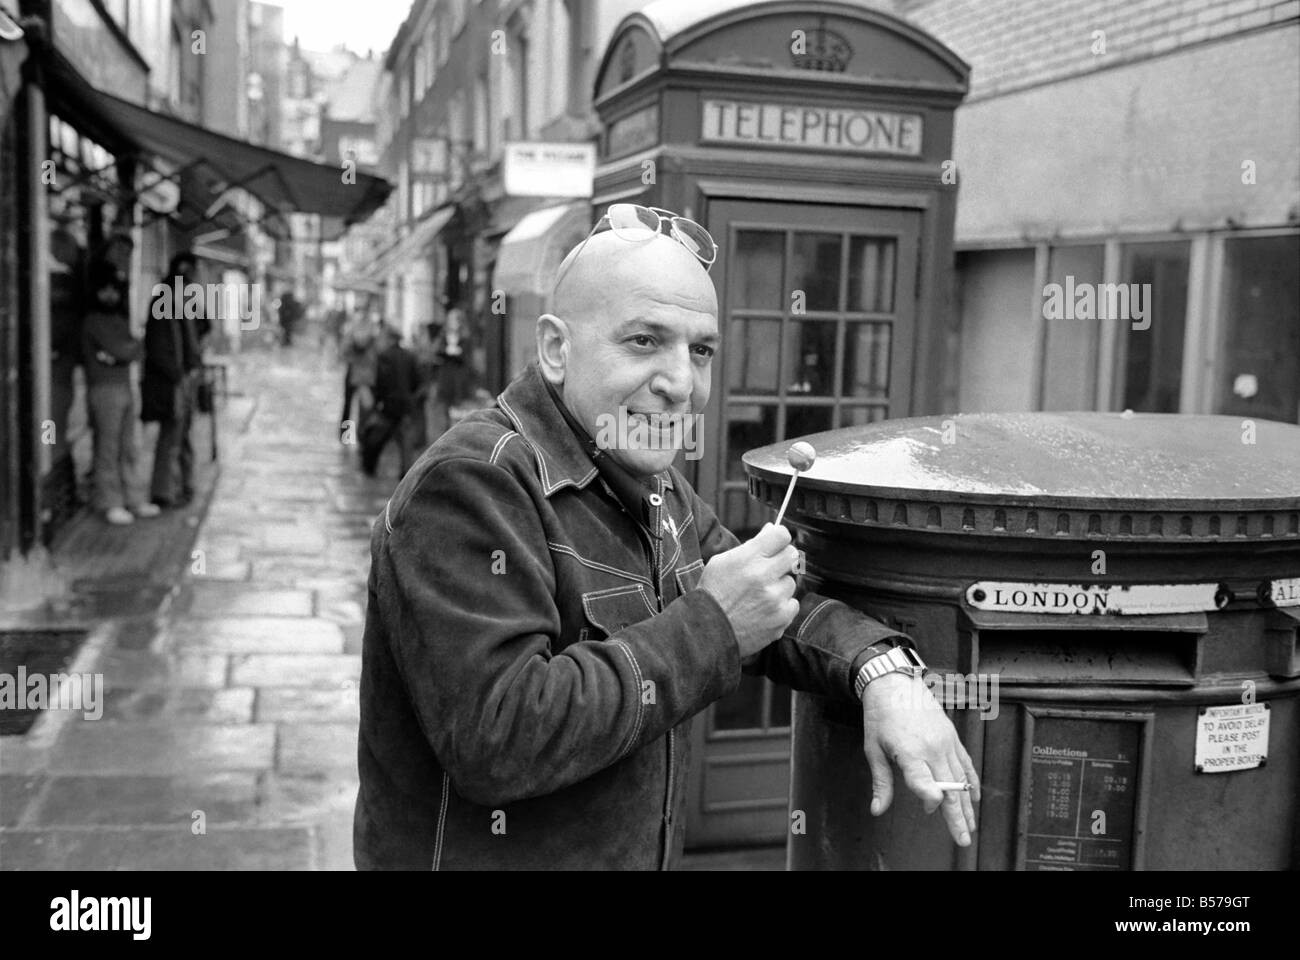 Actor: Telly Savalas (Kojack the Brooklyn cop on T.V.) is in London for a few days to film scenes in a Warner Brothers film called 'Inside Out'. February 1975 75-00927-008 Stock Photo